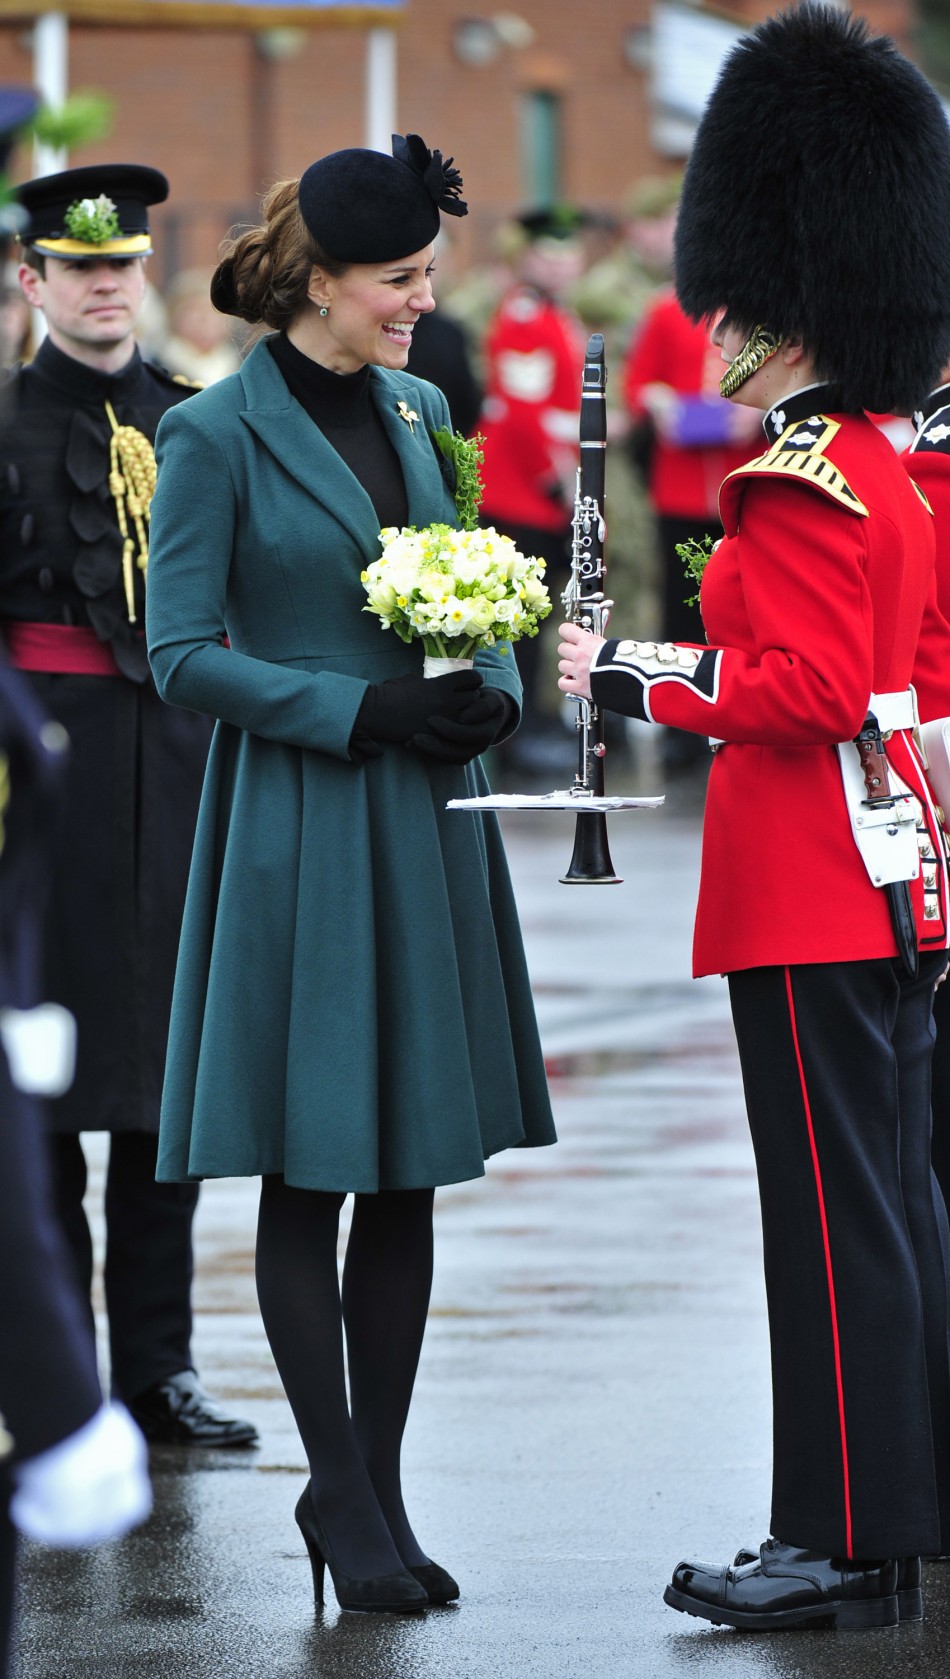 Britains Catherine, Duchess of Cambridge speaks to a soldier during a visit with her husband, Prince William, to attend a St Patricks Day Parade at Mons Barracks in Aldershot, southern England March 17, 2013. Prince William attended the Parade